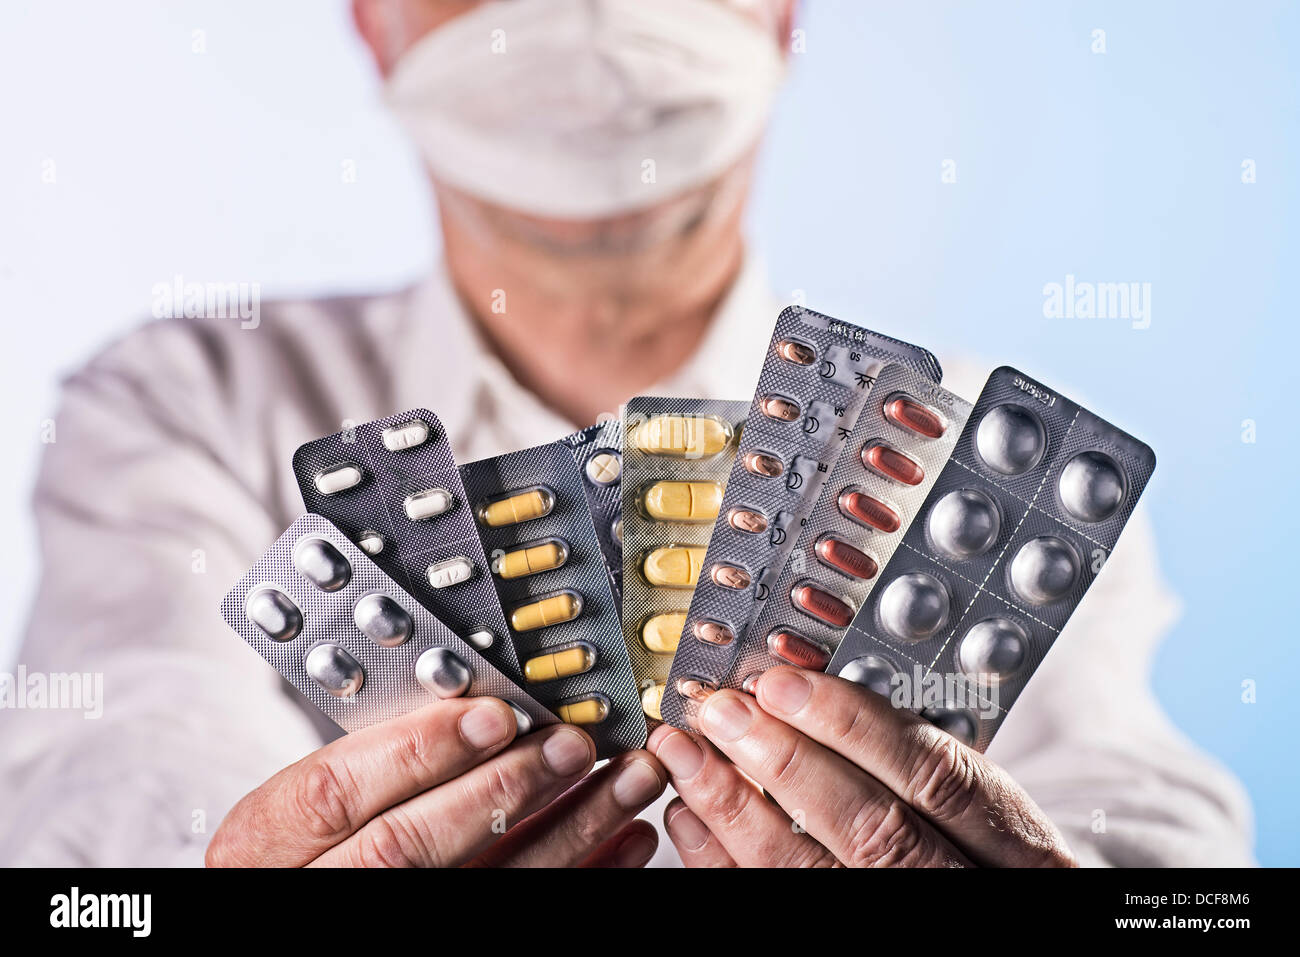 Doctor holds a lot of blisters with different drugs in his hands. Stock Photo